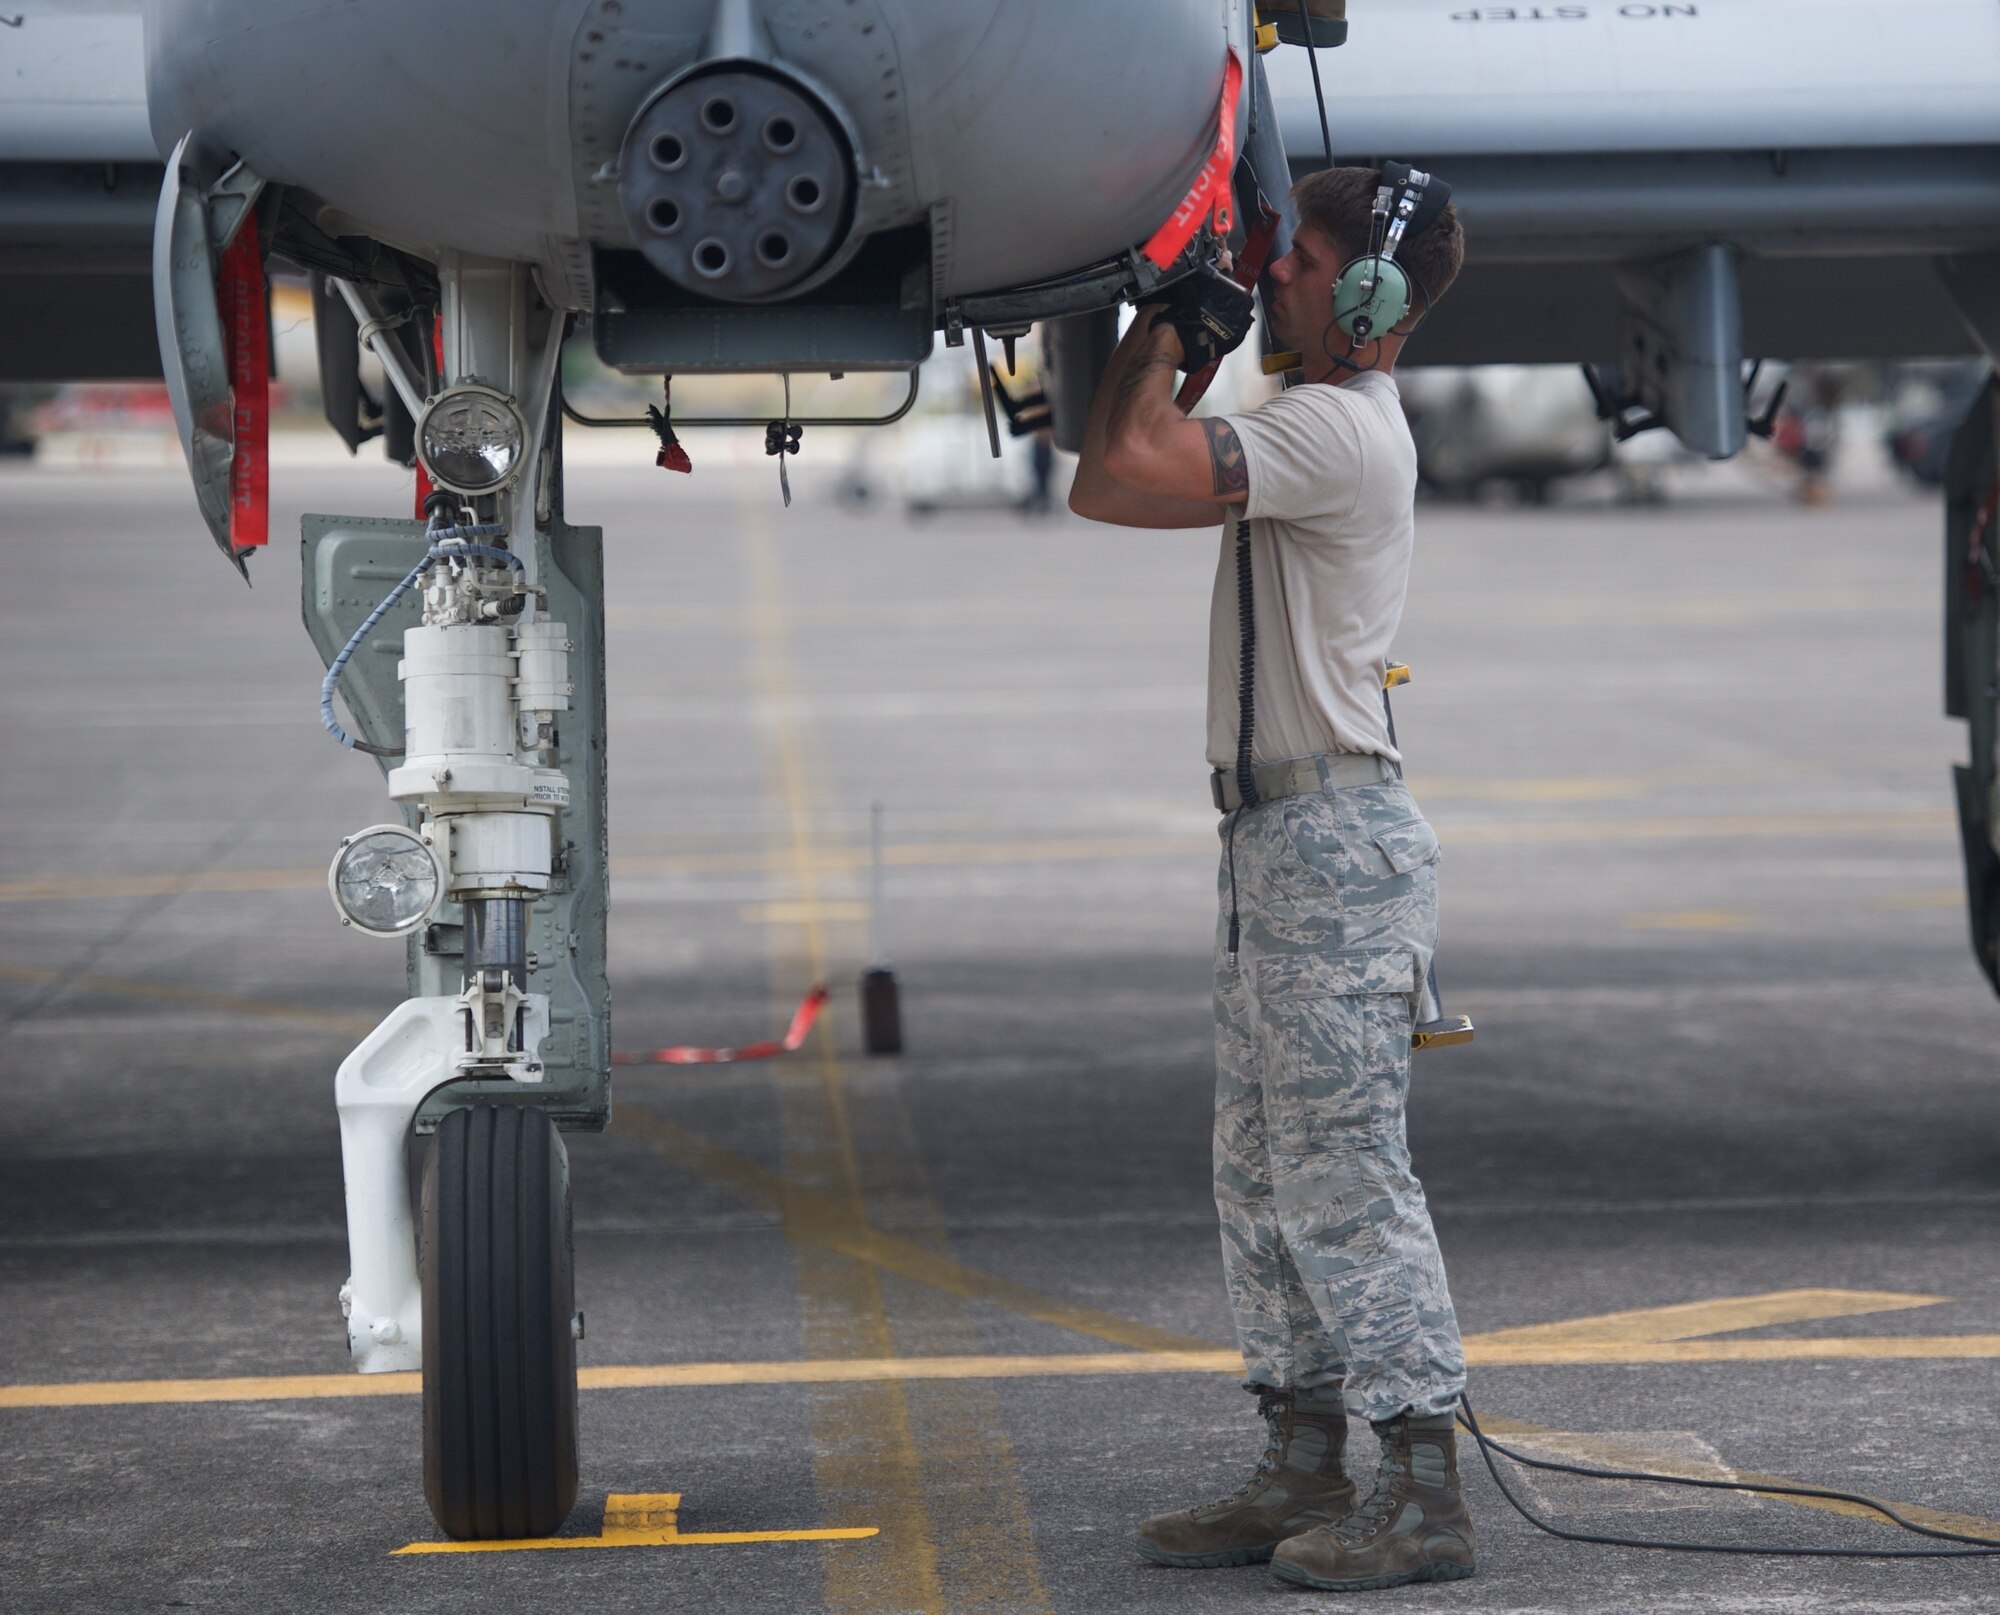 U.S. Air Force Senior Airman Jonathan Simmons, a weapons load crew member deployed from Osan Air Base, Republic of Korea, inspects an A-10C Thunderbolt II prior to the aircraft’s takeoff April 21, 2016, at Clark Air Base, Philippines. The aircraft and Airmen are deployed in support of the first iteration of U.S. Pacific Command’s Air Contingent, designed to promote interoperability and provide greater and more transparent air and maritime situational awareness to ensure safety for military and civilian activities in international waters. (U.S. Air Force photo by Capt. Susan Harrington)